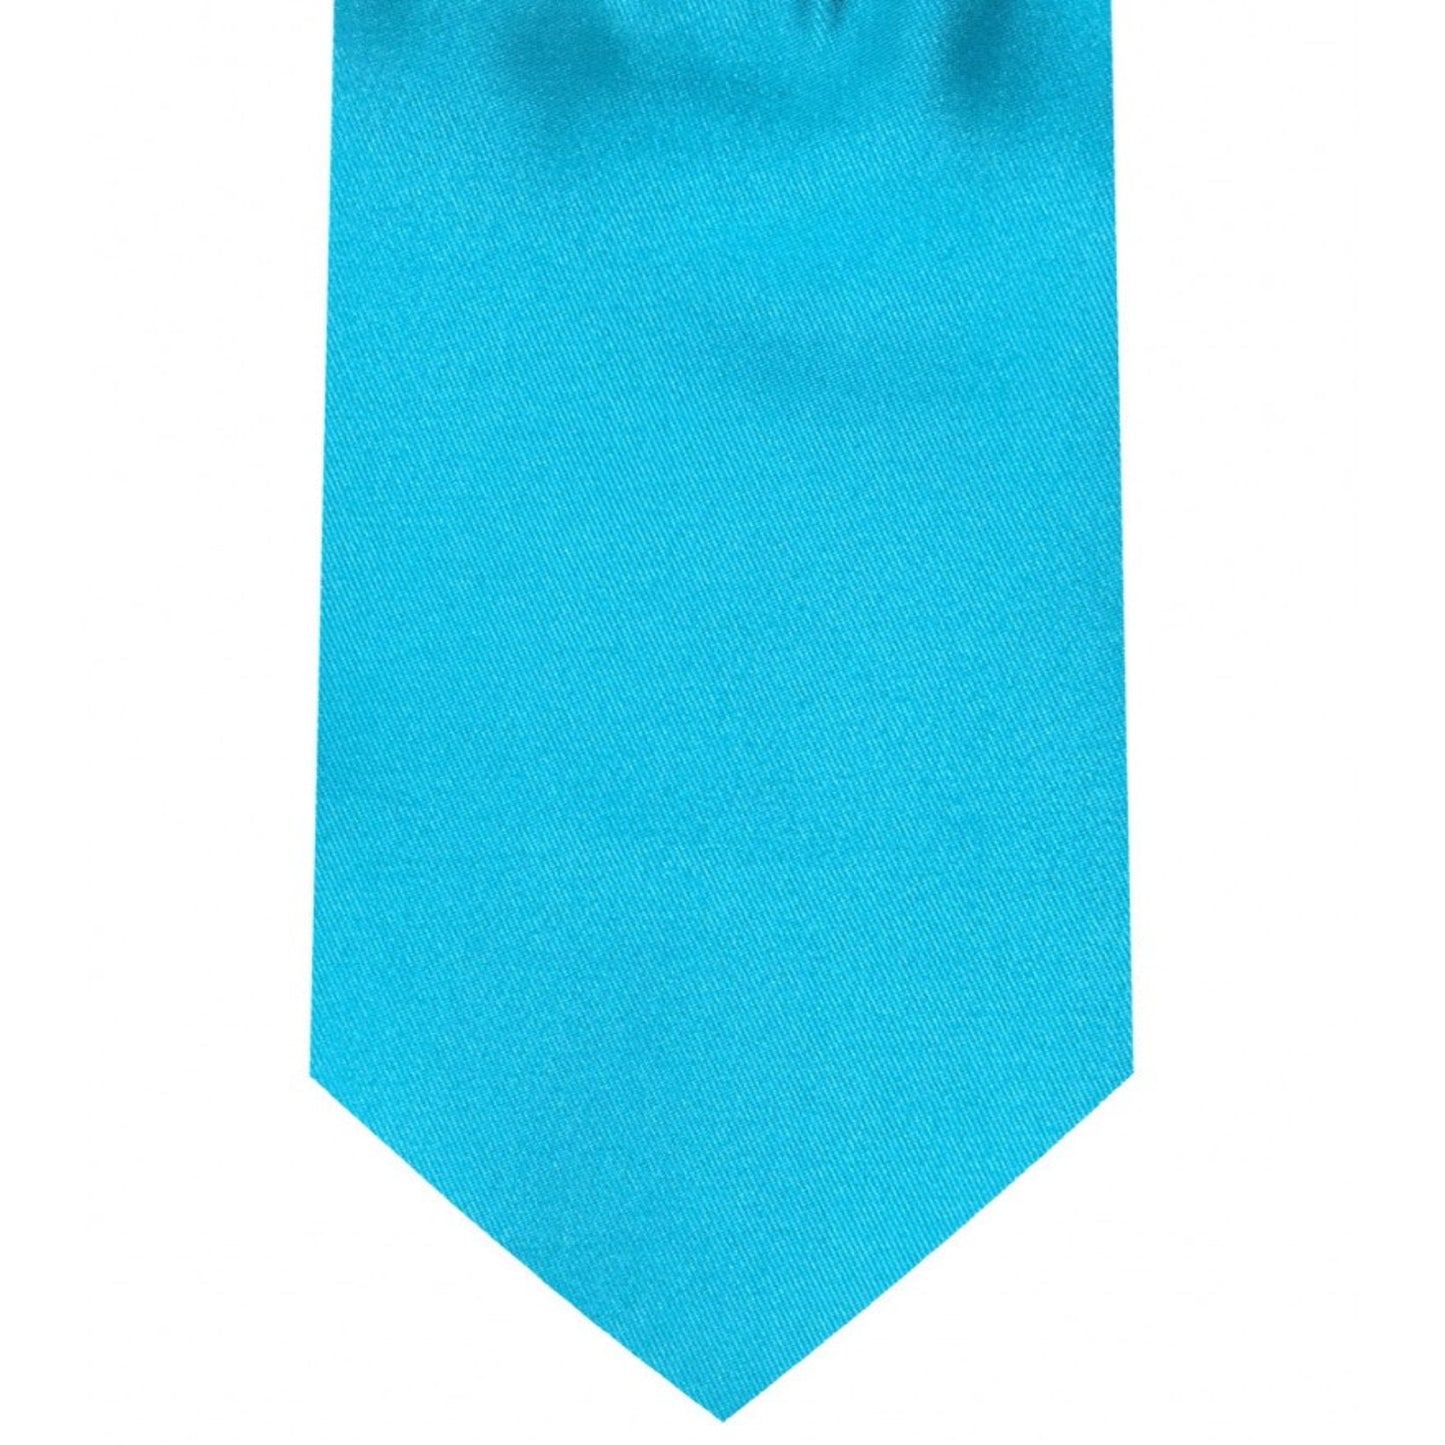 Classic Turquoise Tie Regular width 3.5 inches With Matching Pocket Square | KCT Menswear 